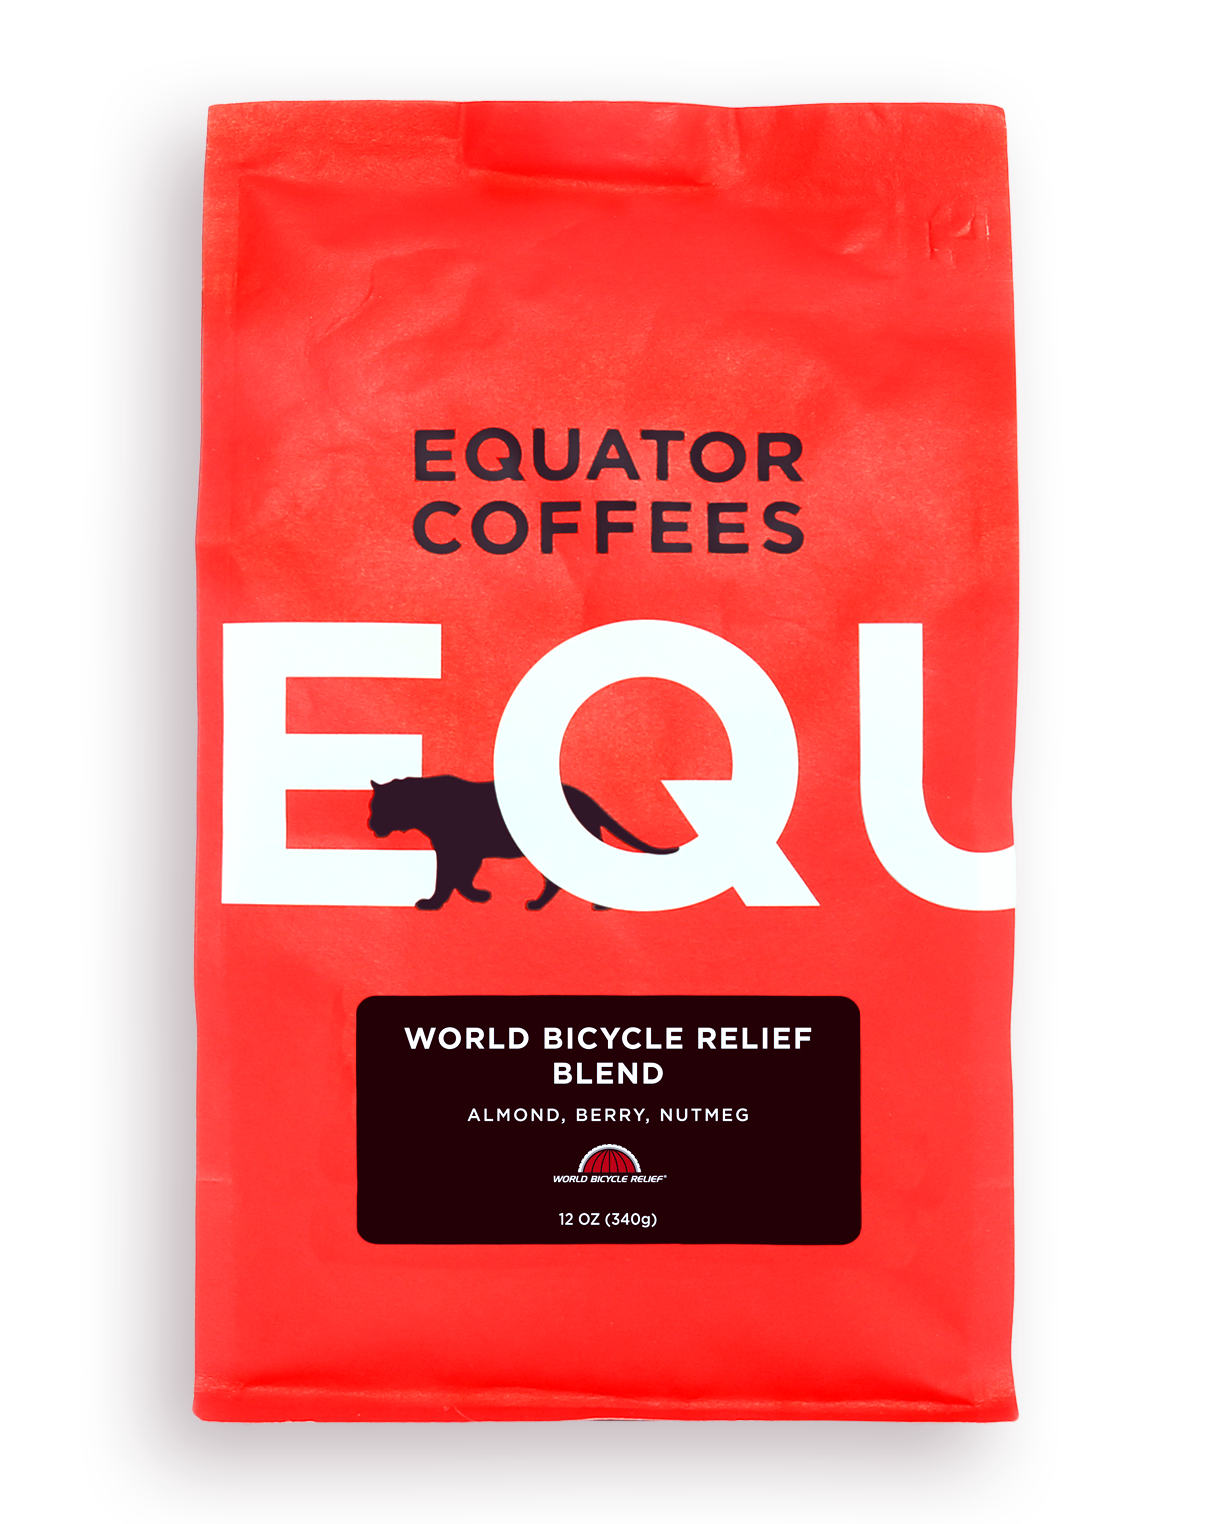 World Bicycle Relief Blend